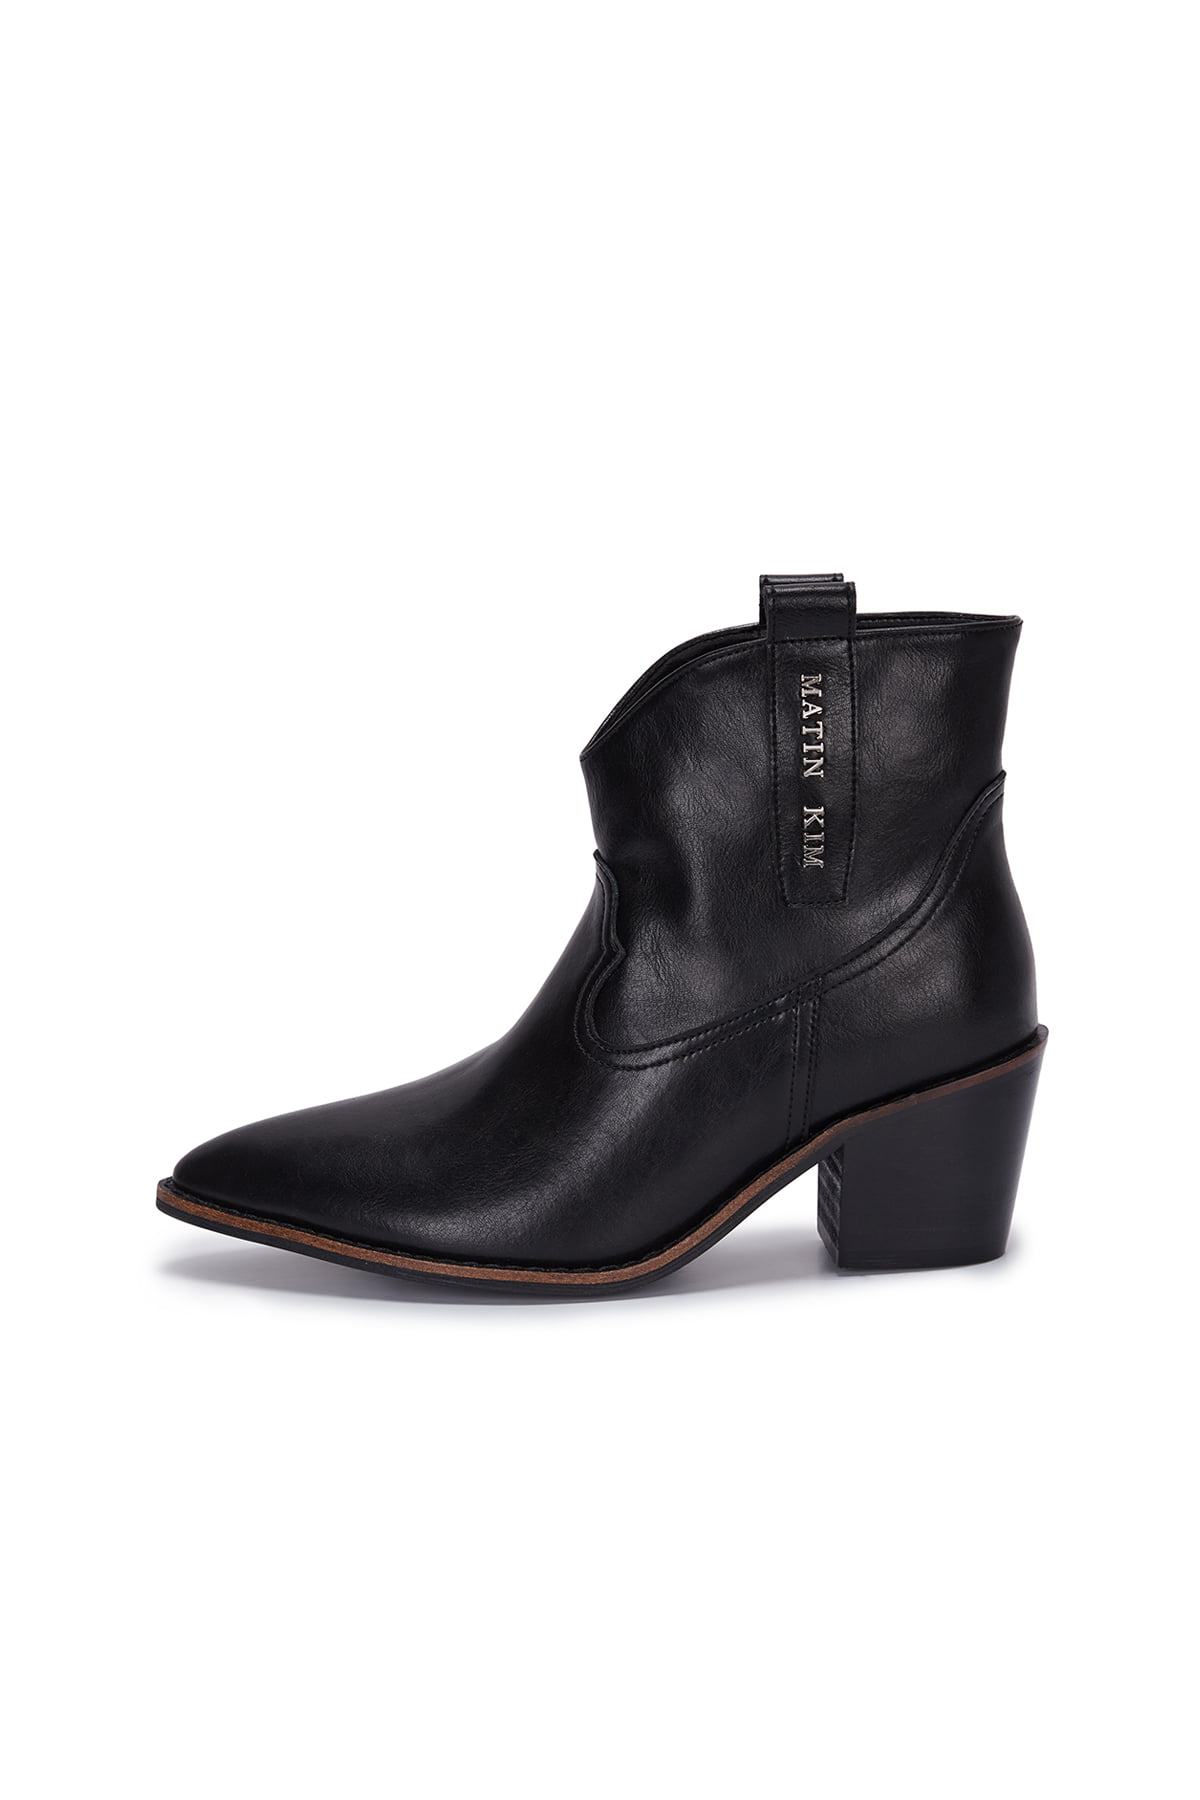 WESTERN ANKLE BOOTS IN BLACK